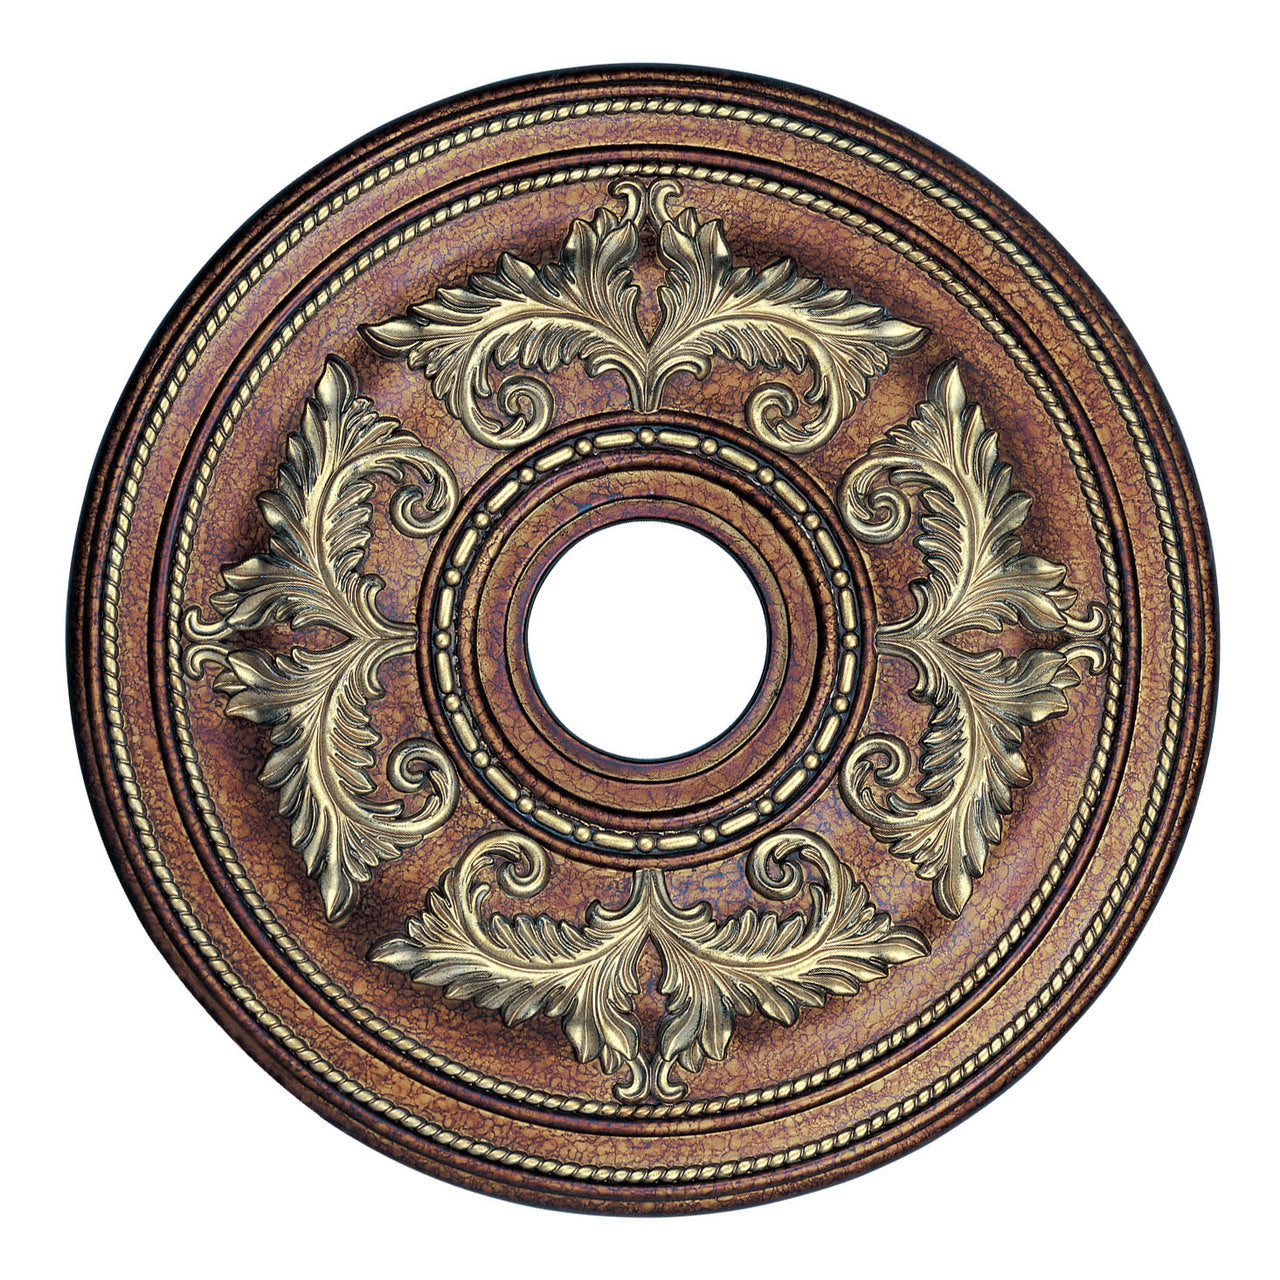 LIVEX Lighting 8200-64 Ceiling Medallion in Palacial Bronze with Gilded Accents